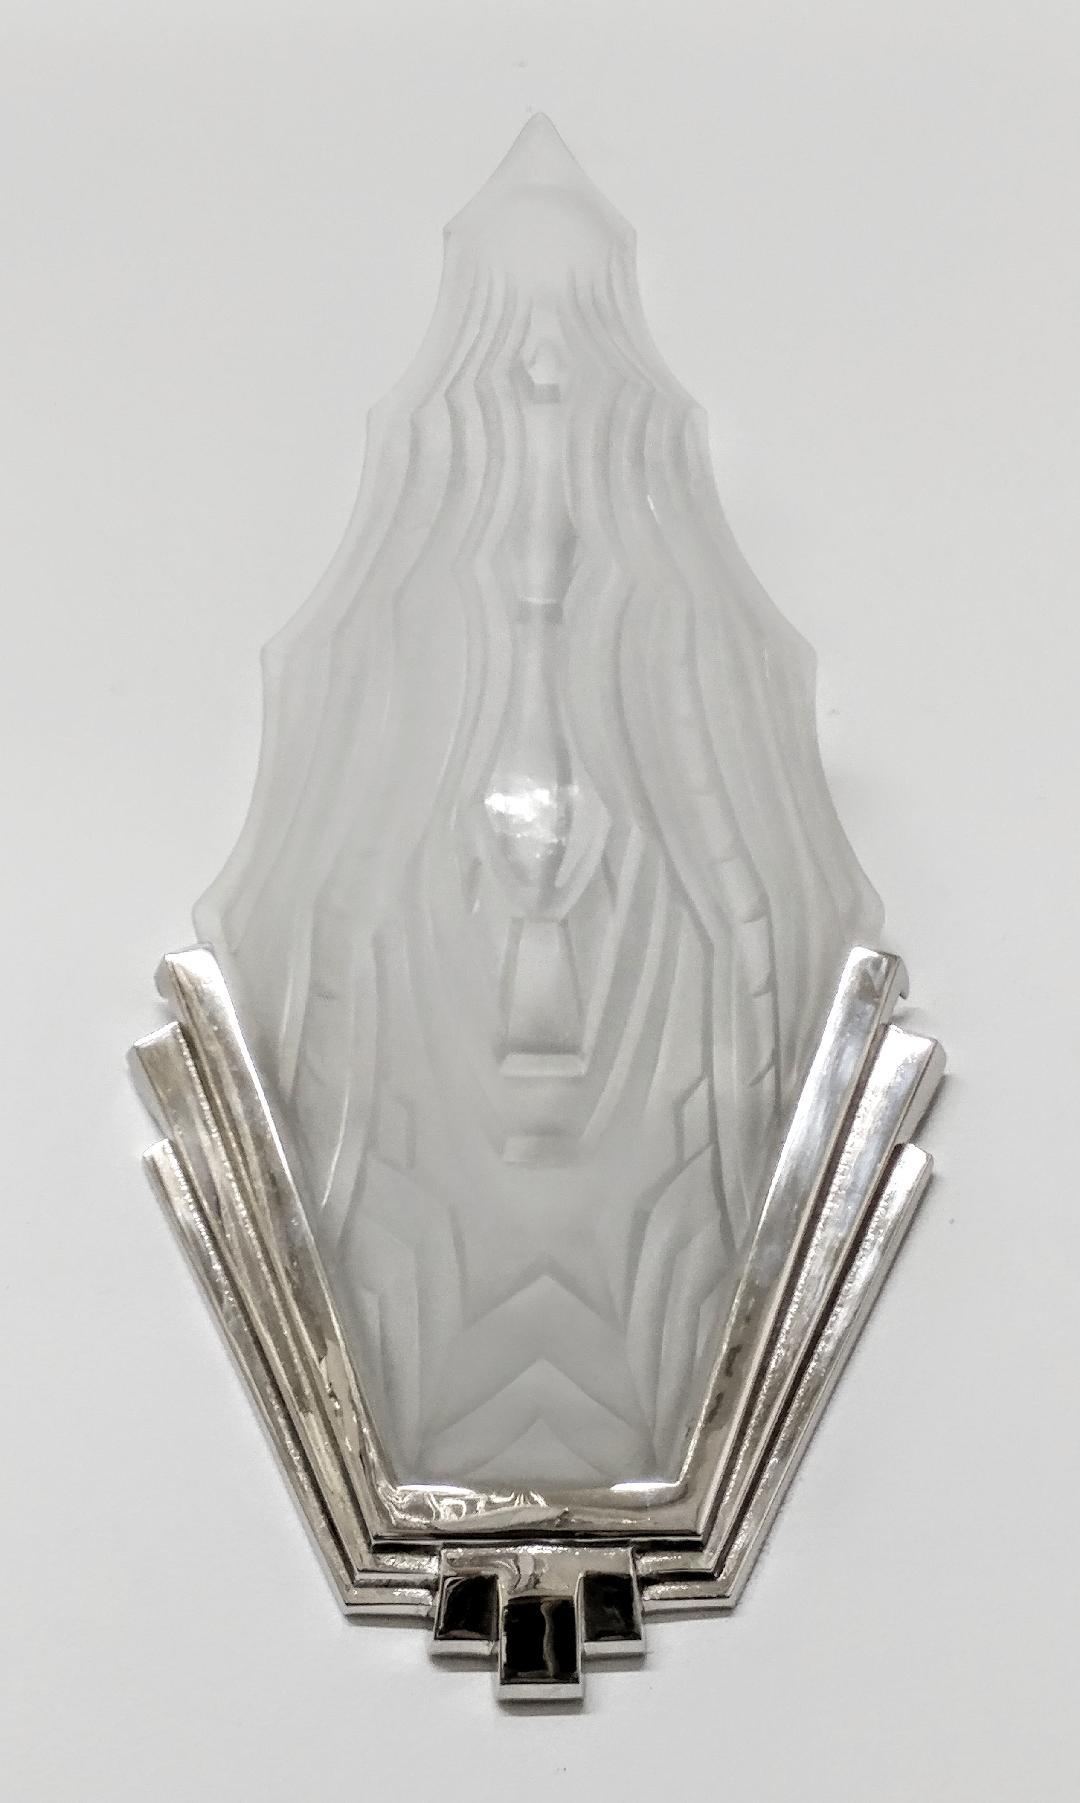 A stunning pair of French Art Deco wall sconces by the French artist “ Sabino “ in clear and frosted molded glass shades with geometric motifs. Held by polished nickel bronze geometric design frames. Replated in nickel and rewired to U.S. standards